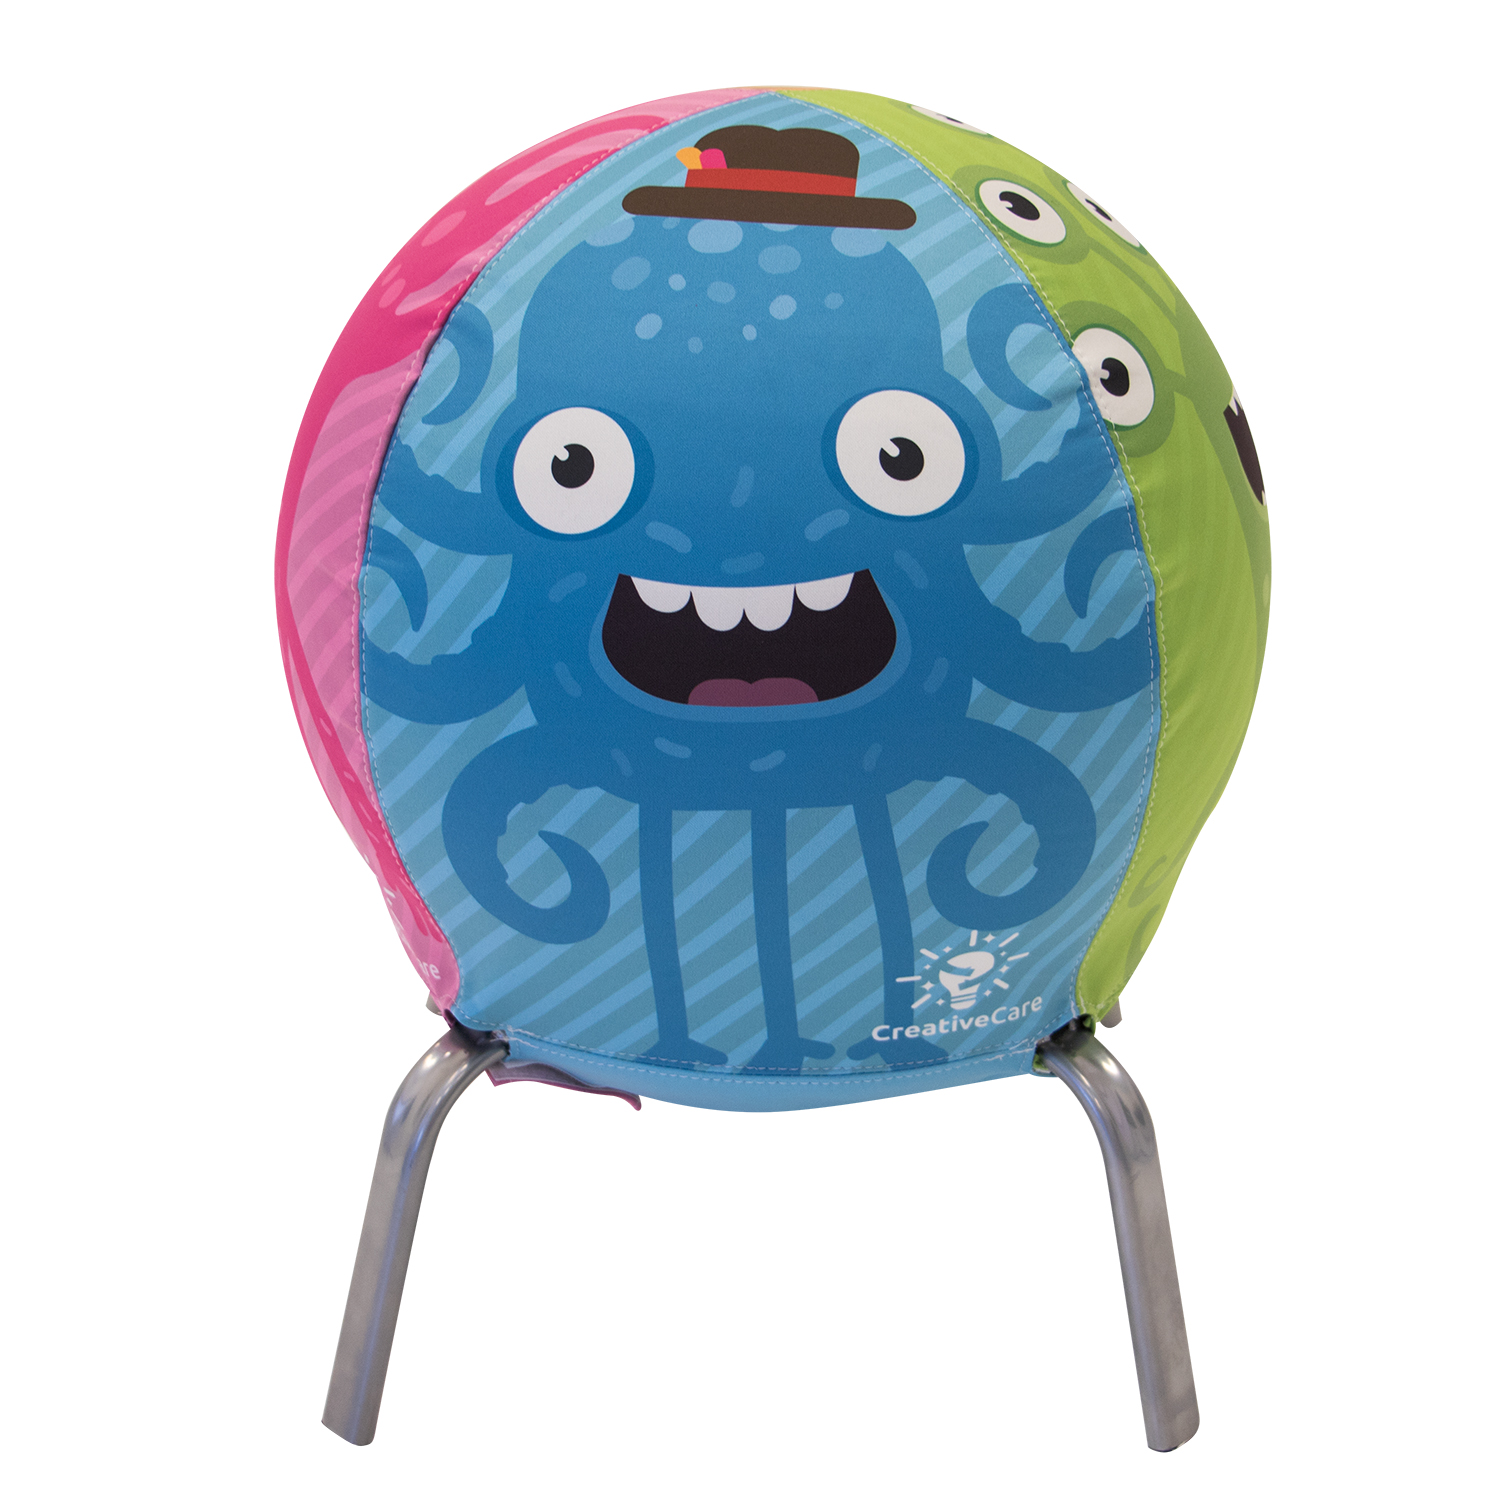 multi colored soft ball with metal legs